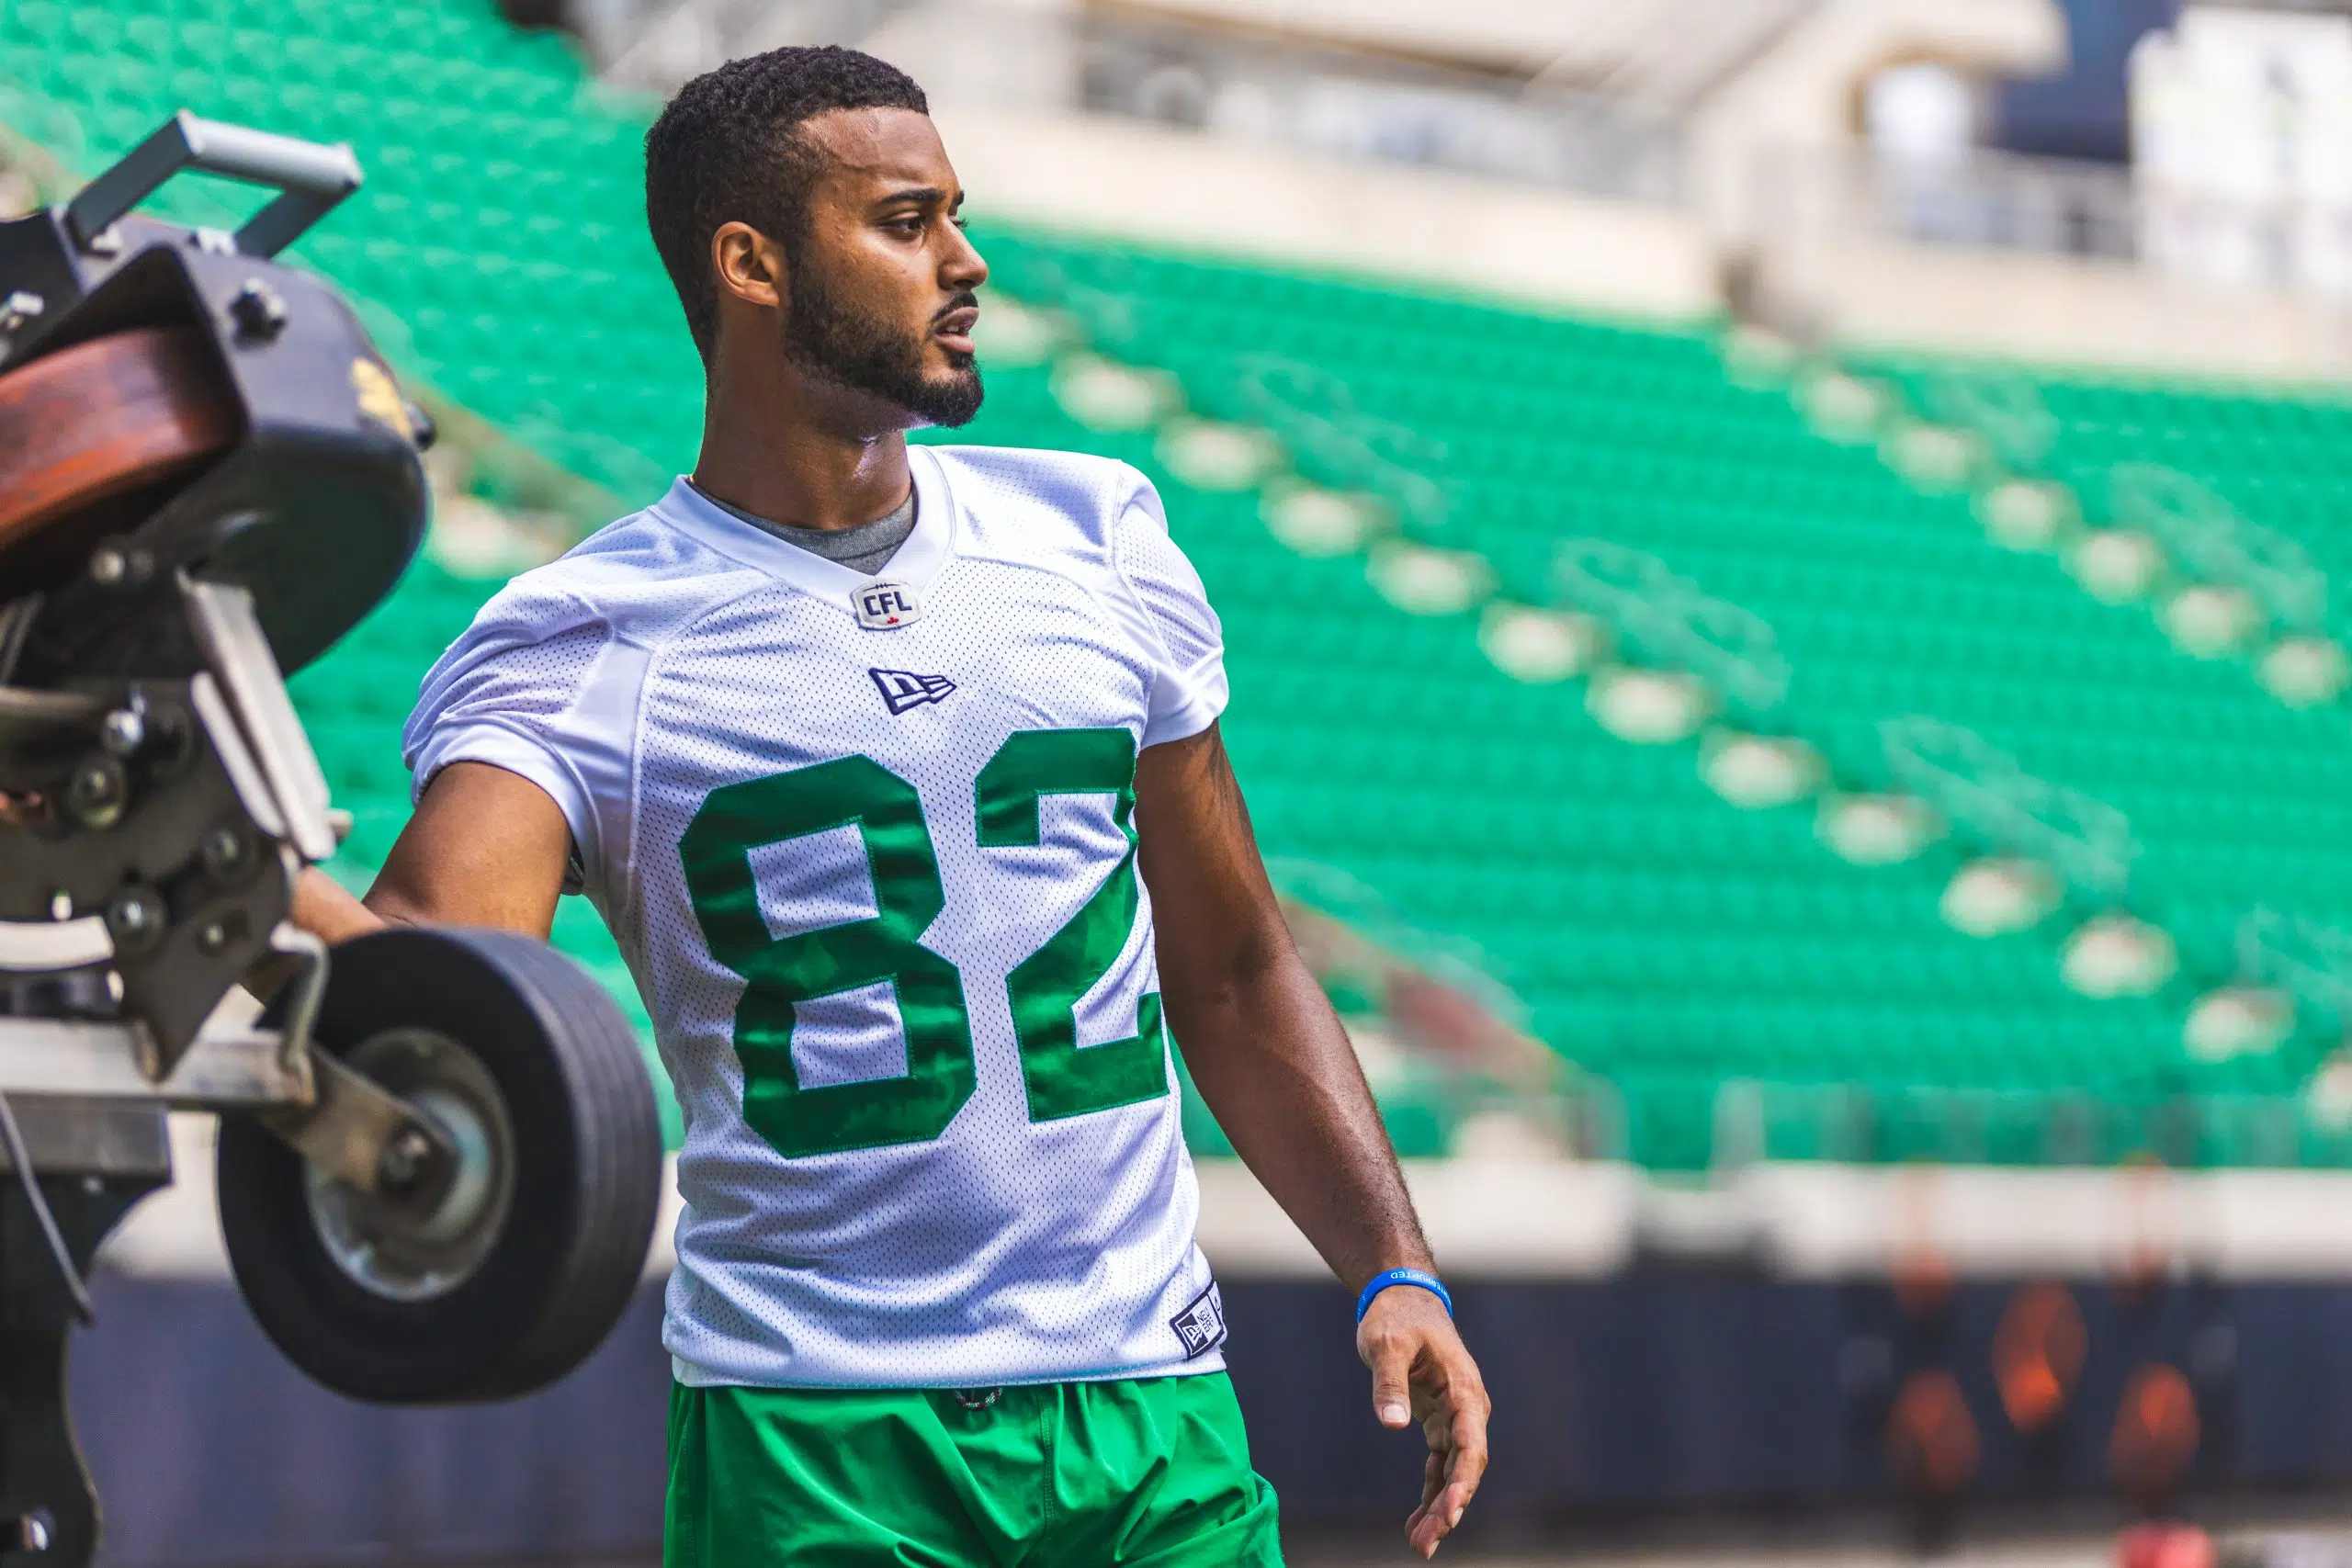 Riders Canadian receiver rookie duo catching on during training camp